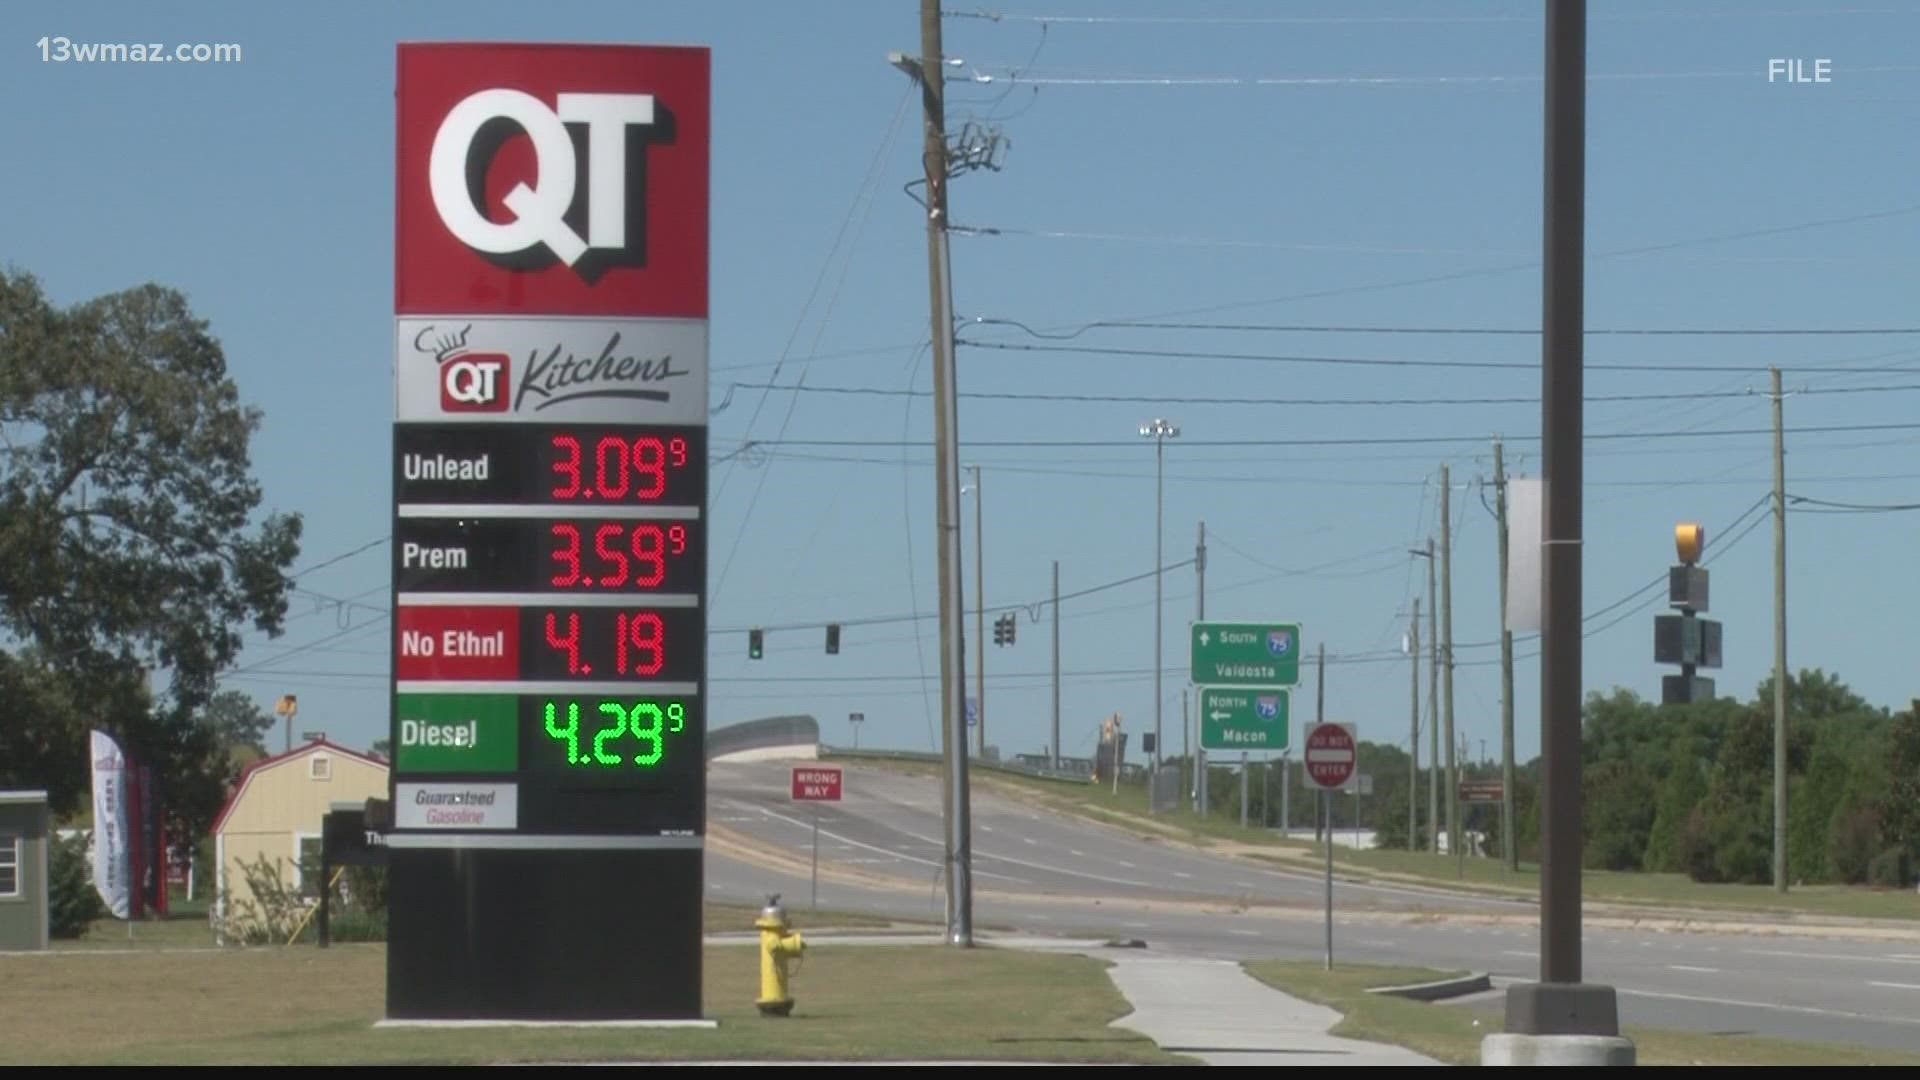 Right now, prices have dropped since the summer with the national average under $4 per gallon.